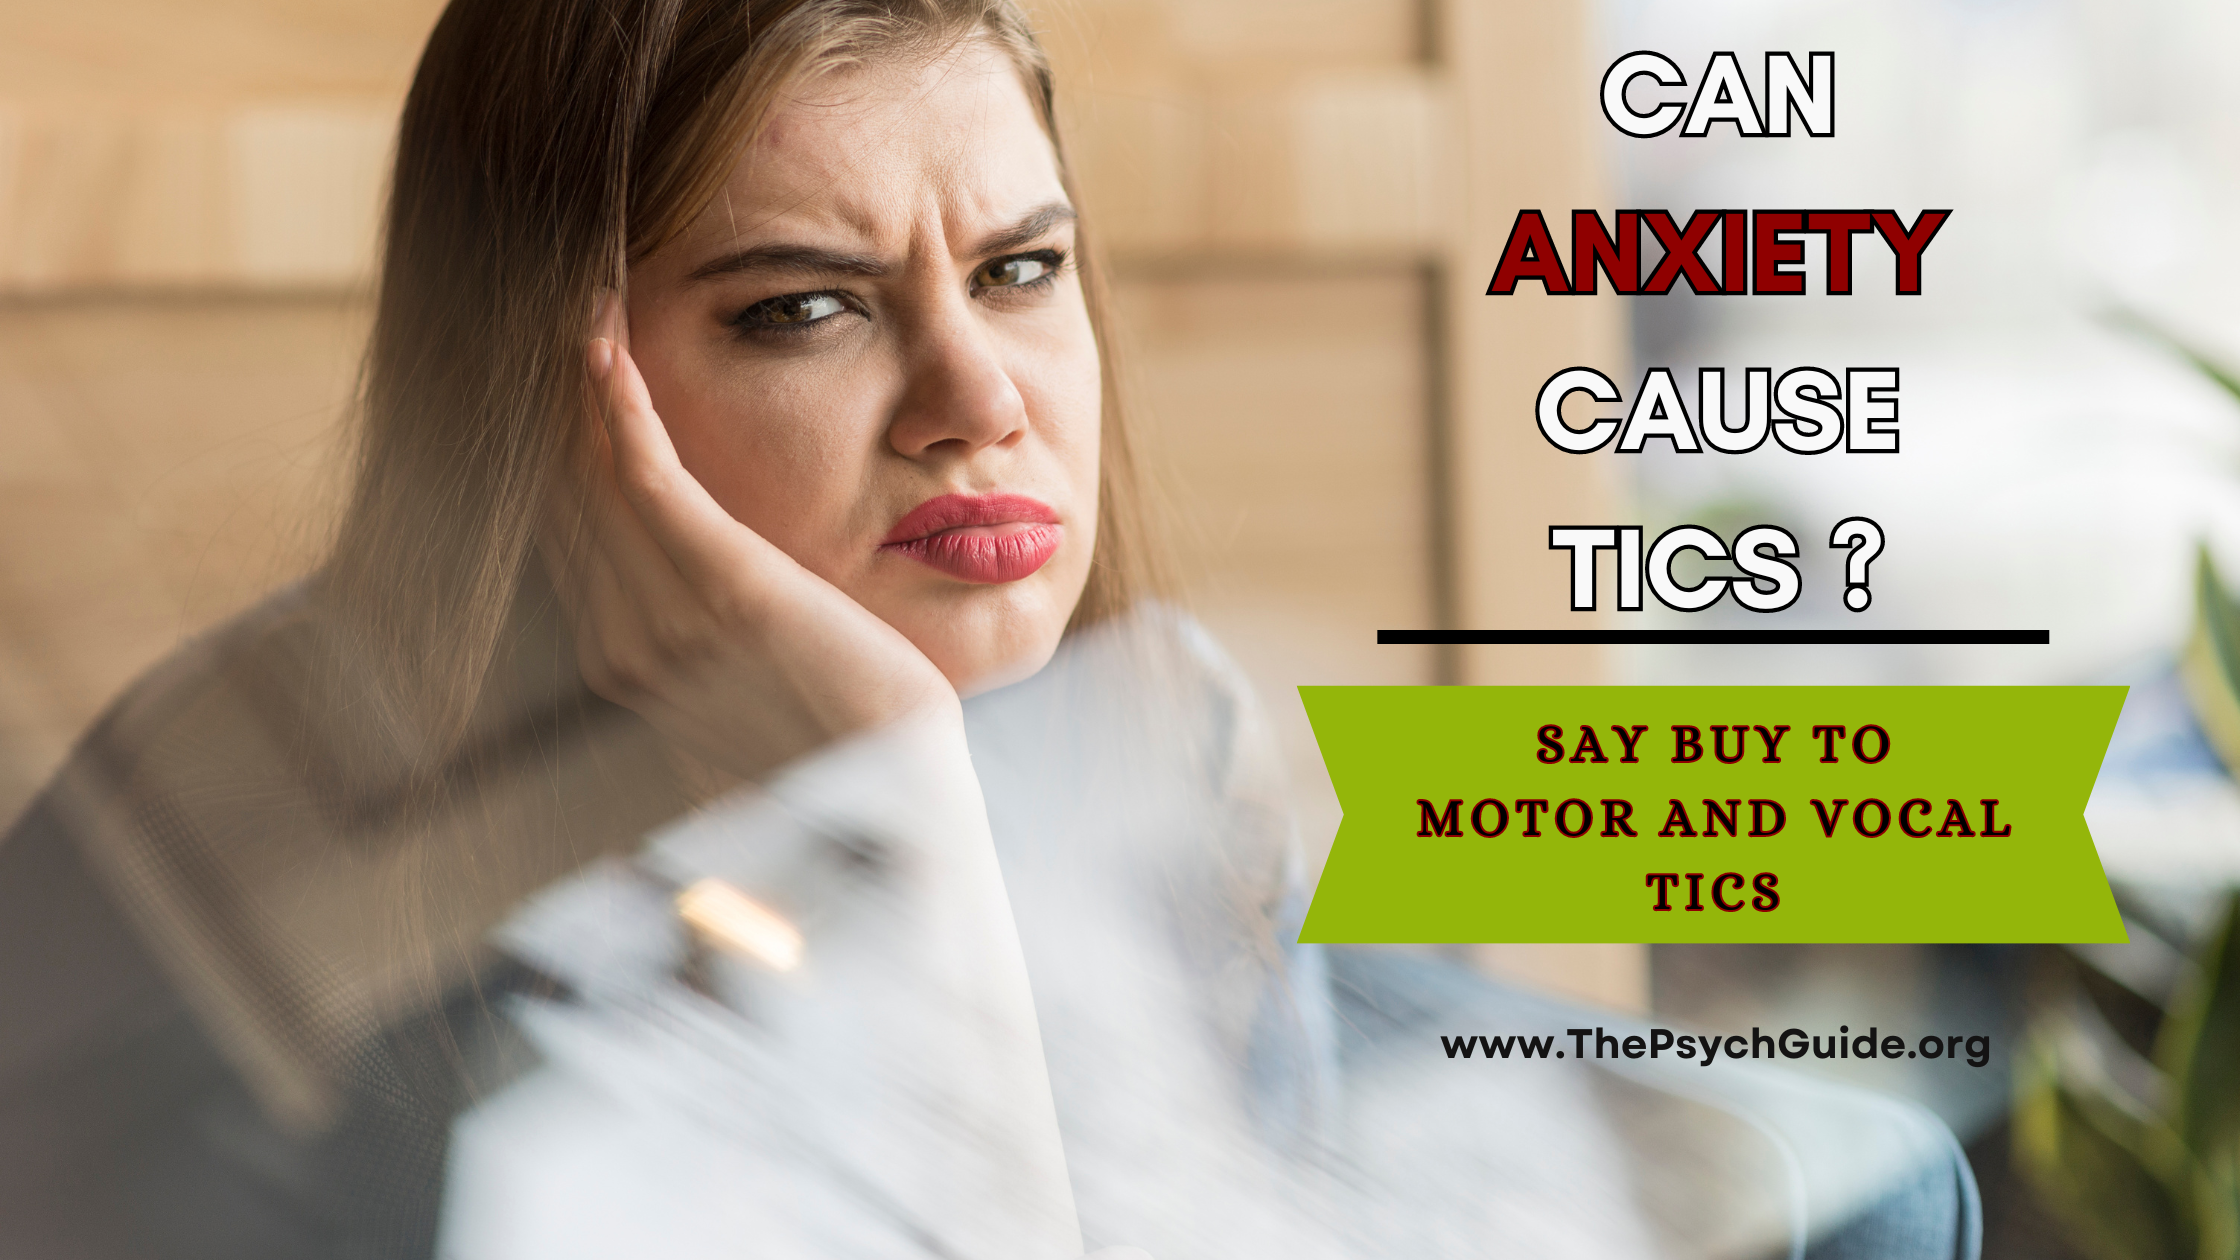 Can anxiety cause tics